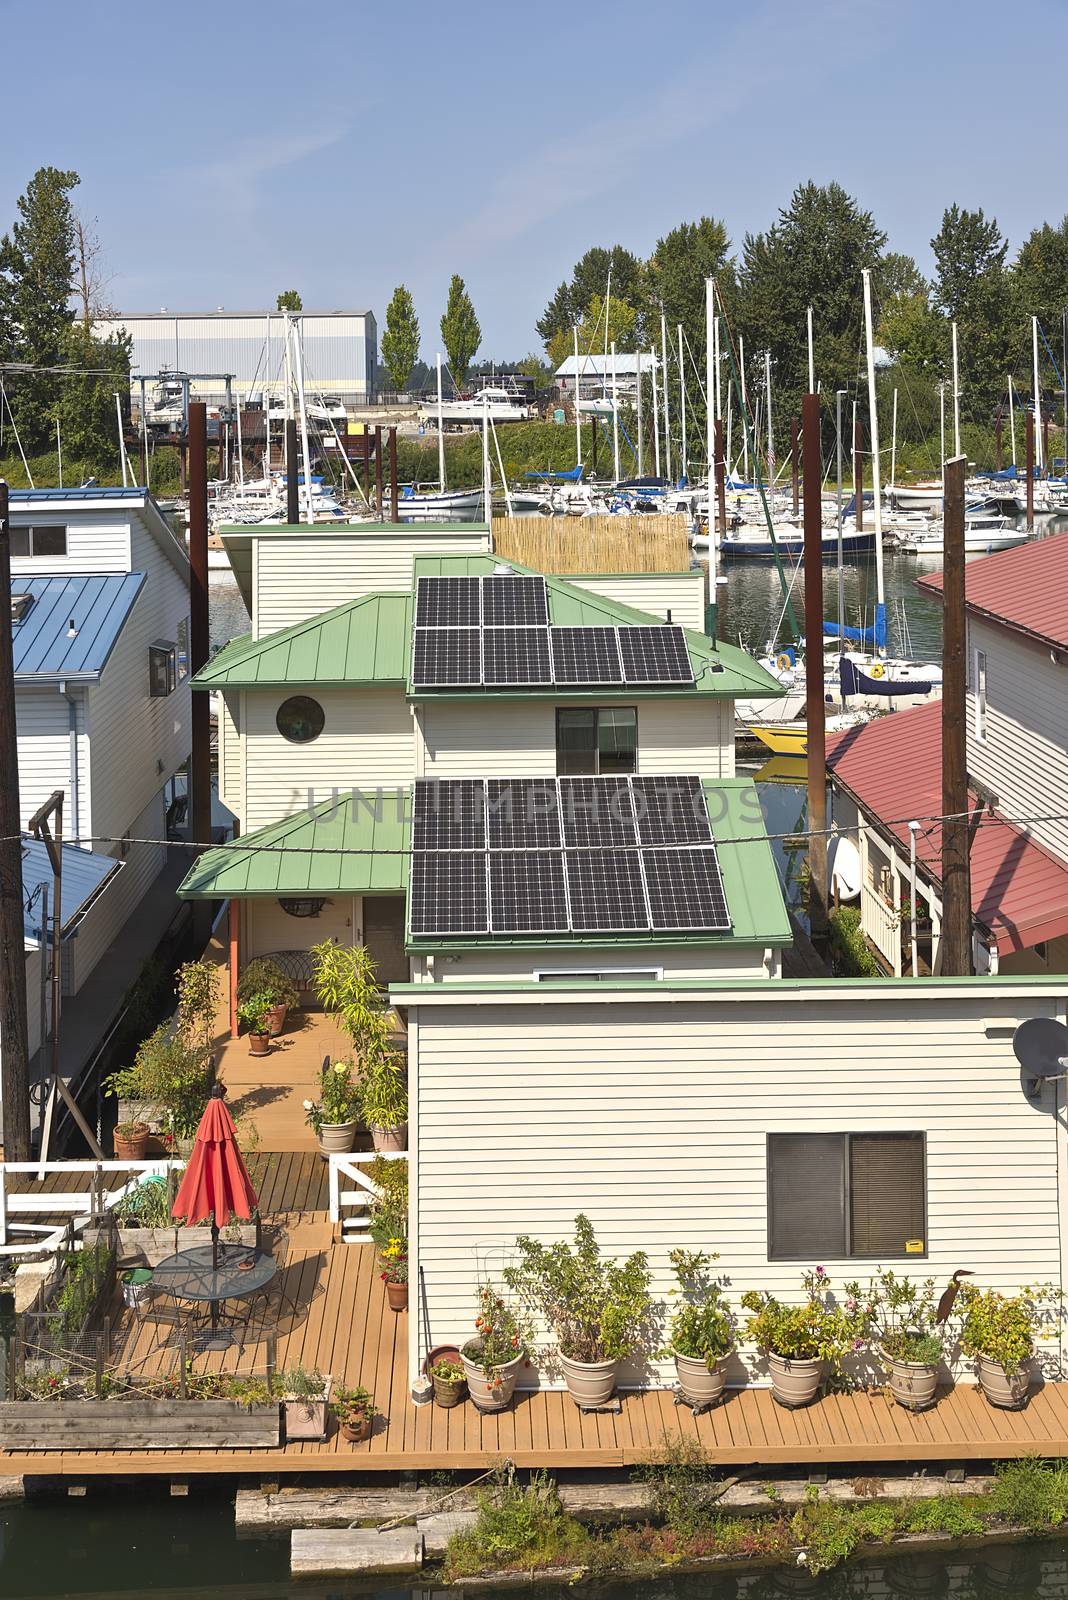 Rooftops and floating houses in a marina portland Oregon.